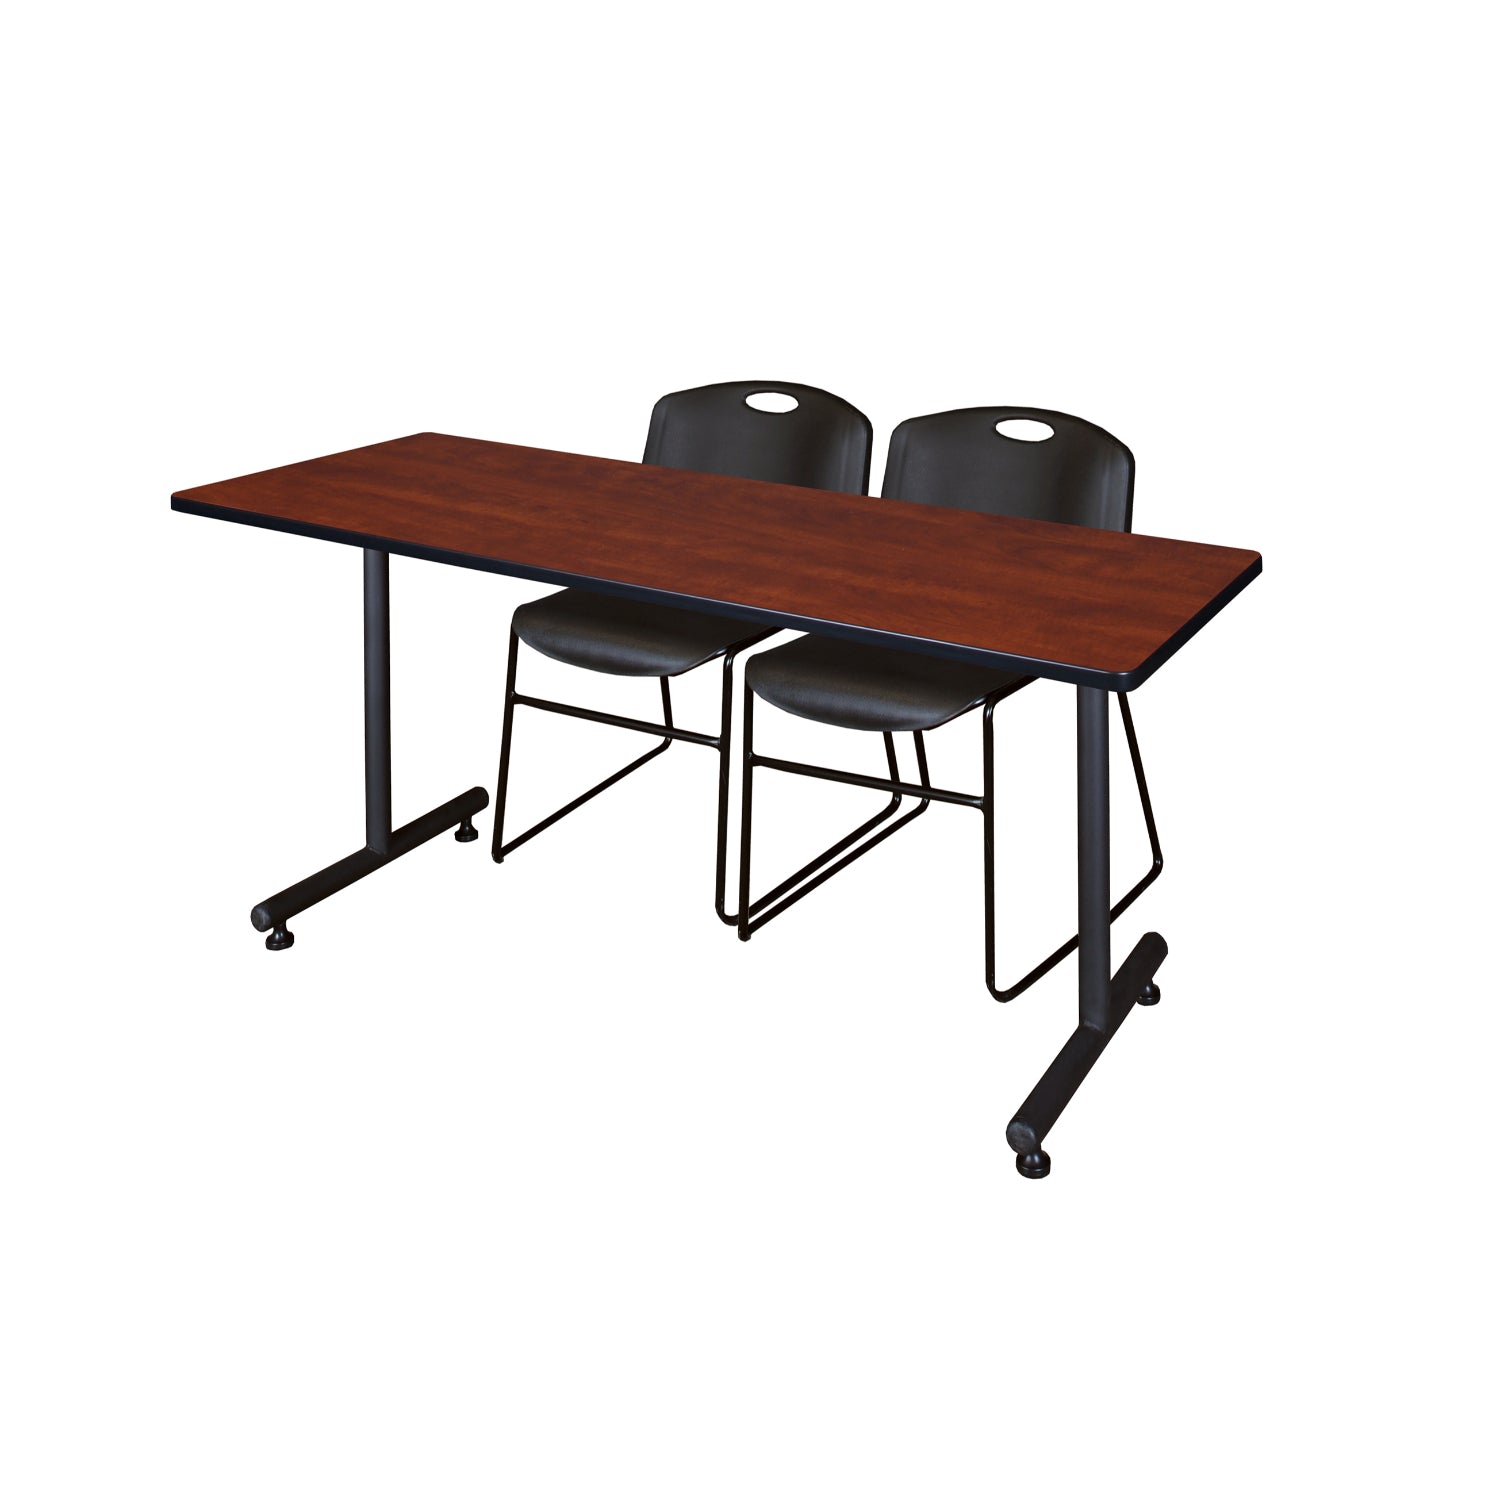 Kobe Training Table and Chair Package, Kobe 72" x 24" T-Base Training/Seminar Table with 2 Zeng Stack Chairs